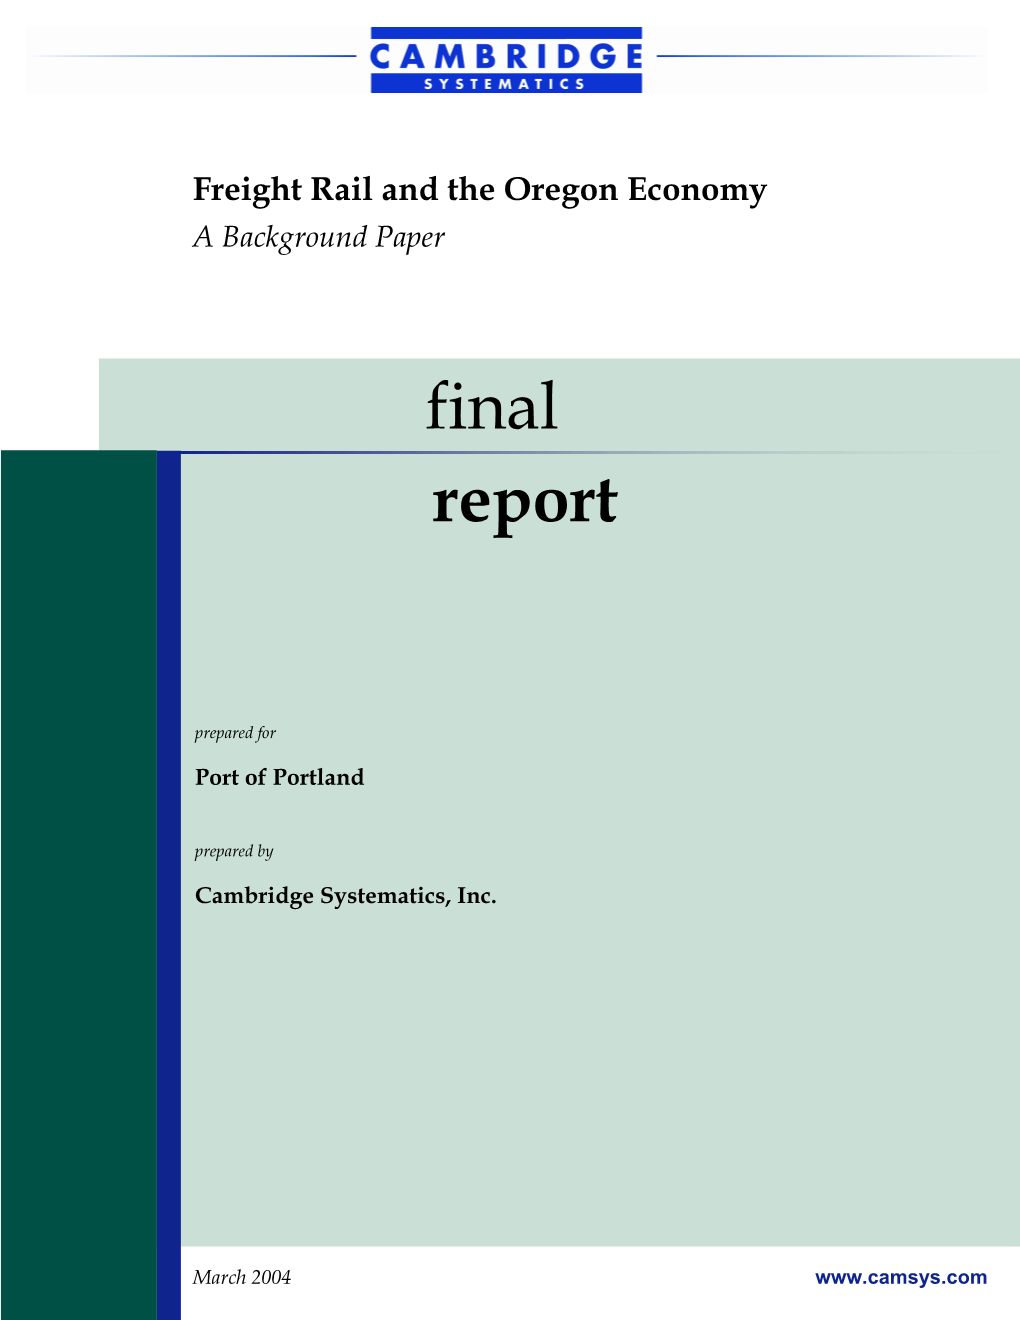 Freight Rail and the Oregon Economy a Background Paper